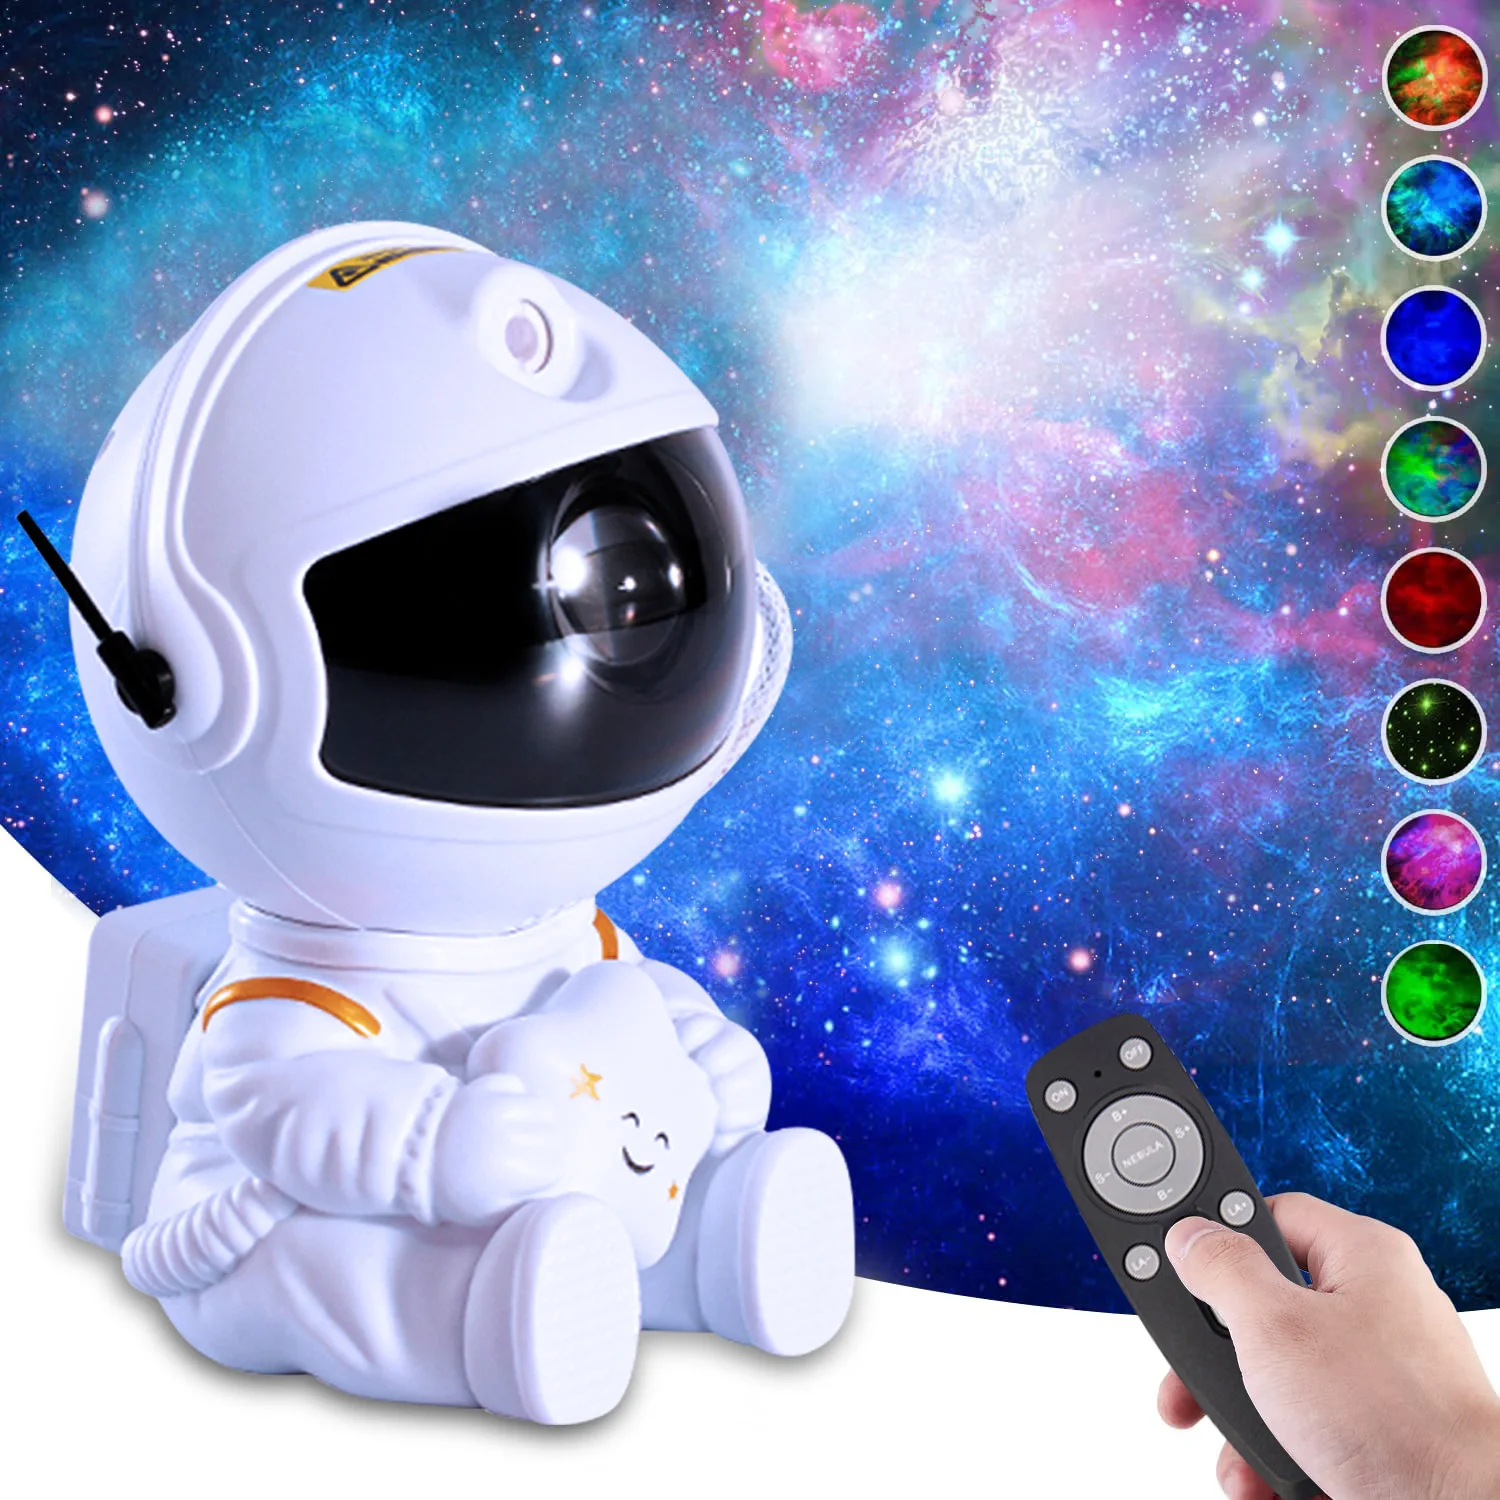 

Galaxy Star Projector Nebula Projection Lamp Astronaut Starry Night Light Home Room Decoration Bedroom Luminaires for Kids Gifts